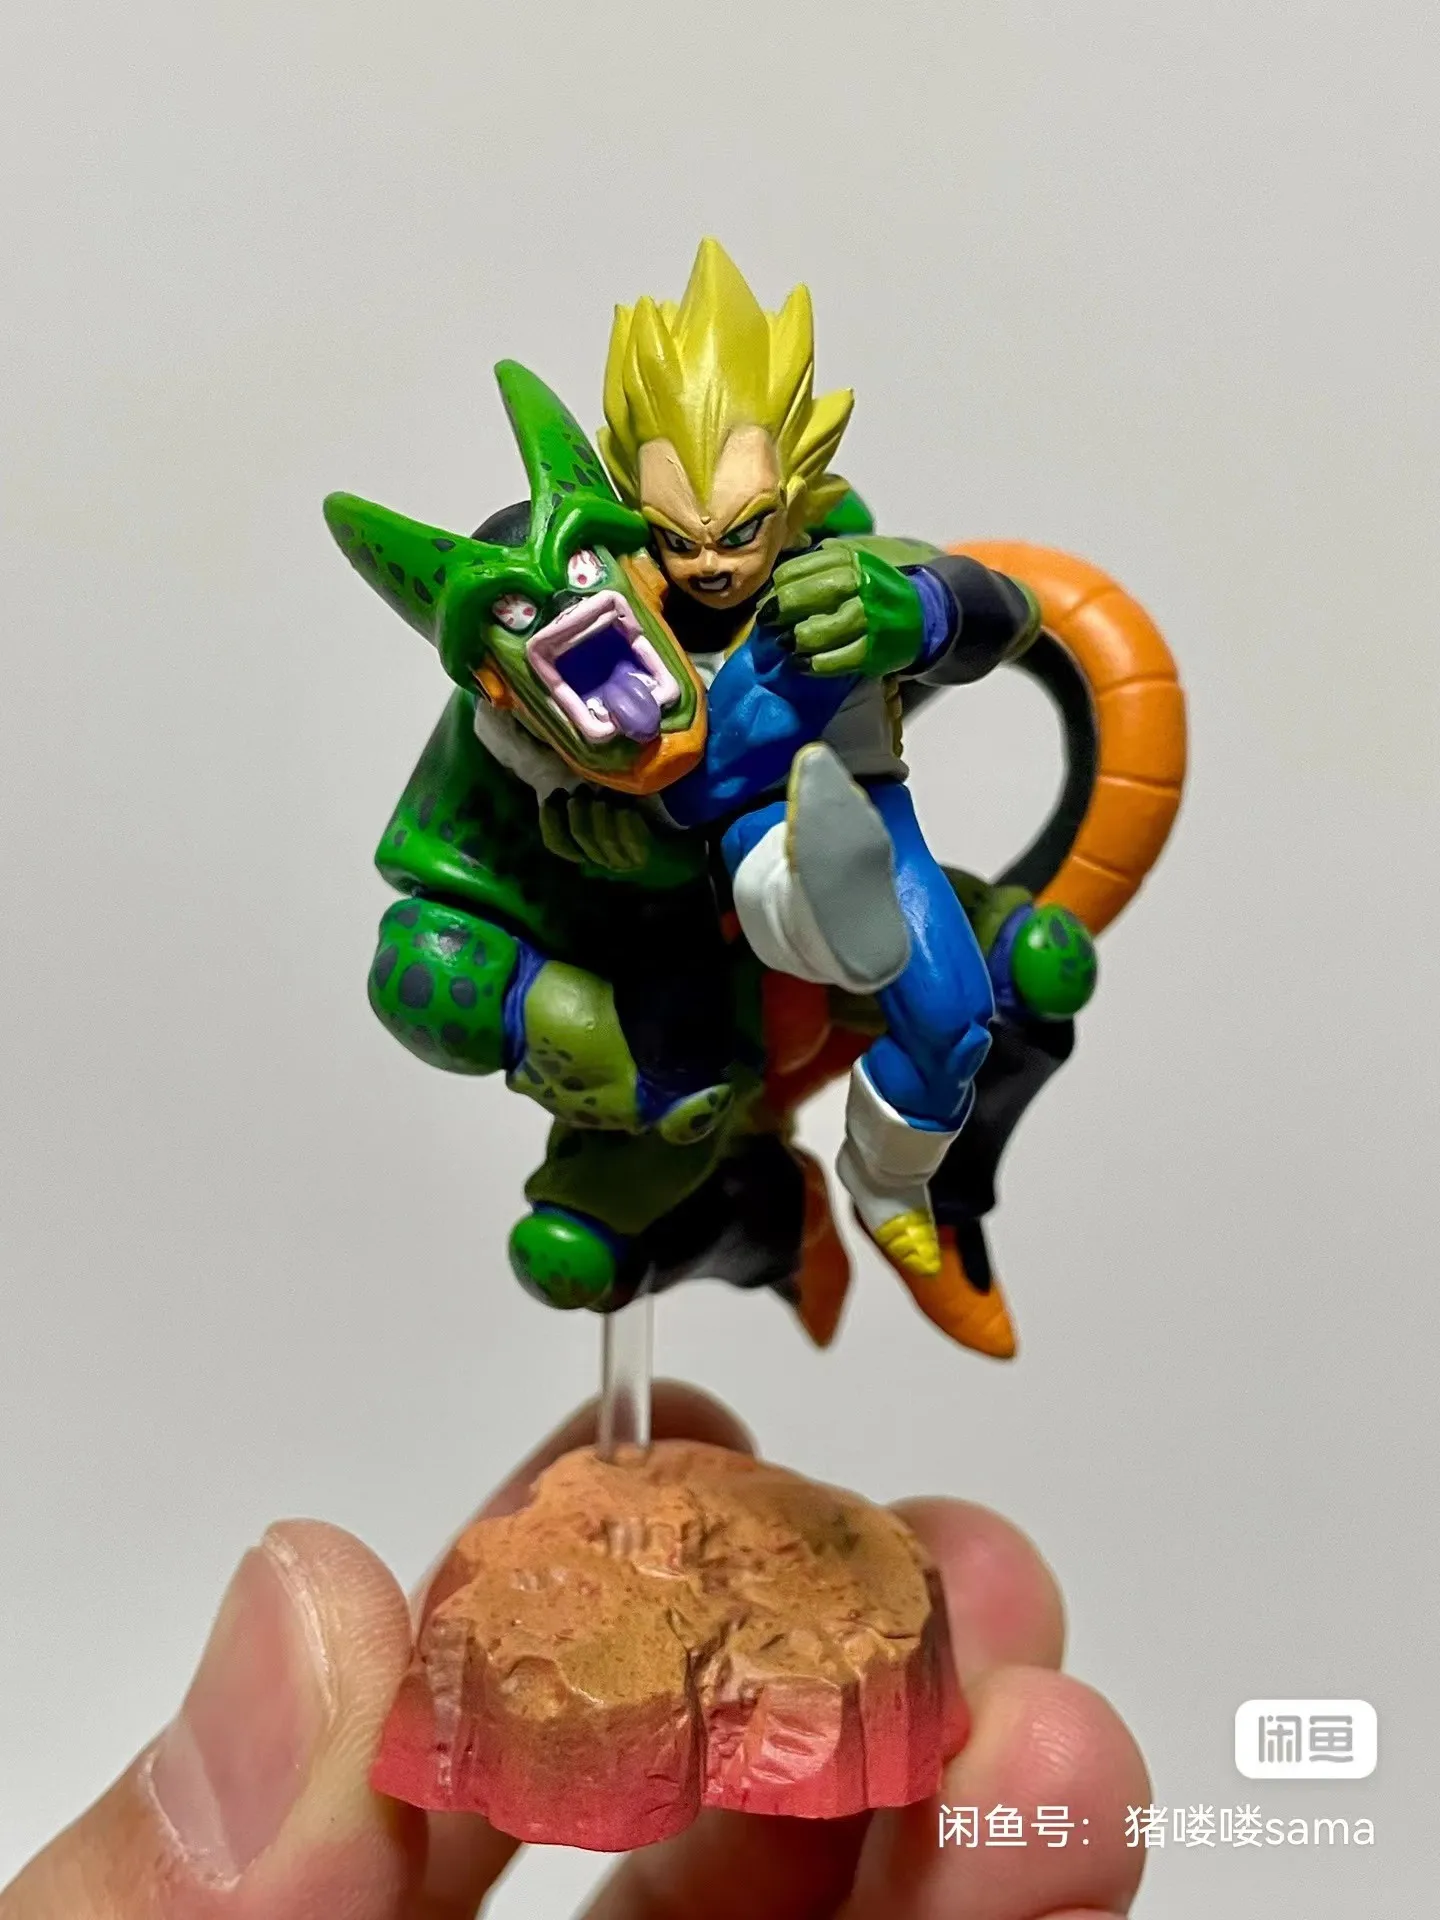 Dragon Ball Z Capsule Neo Return of Cell Figures